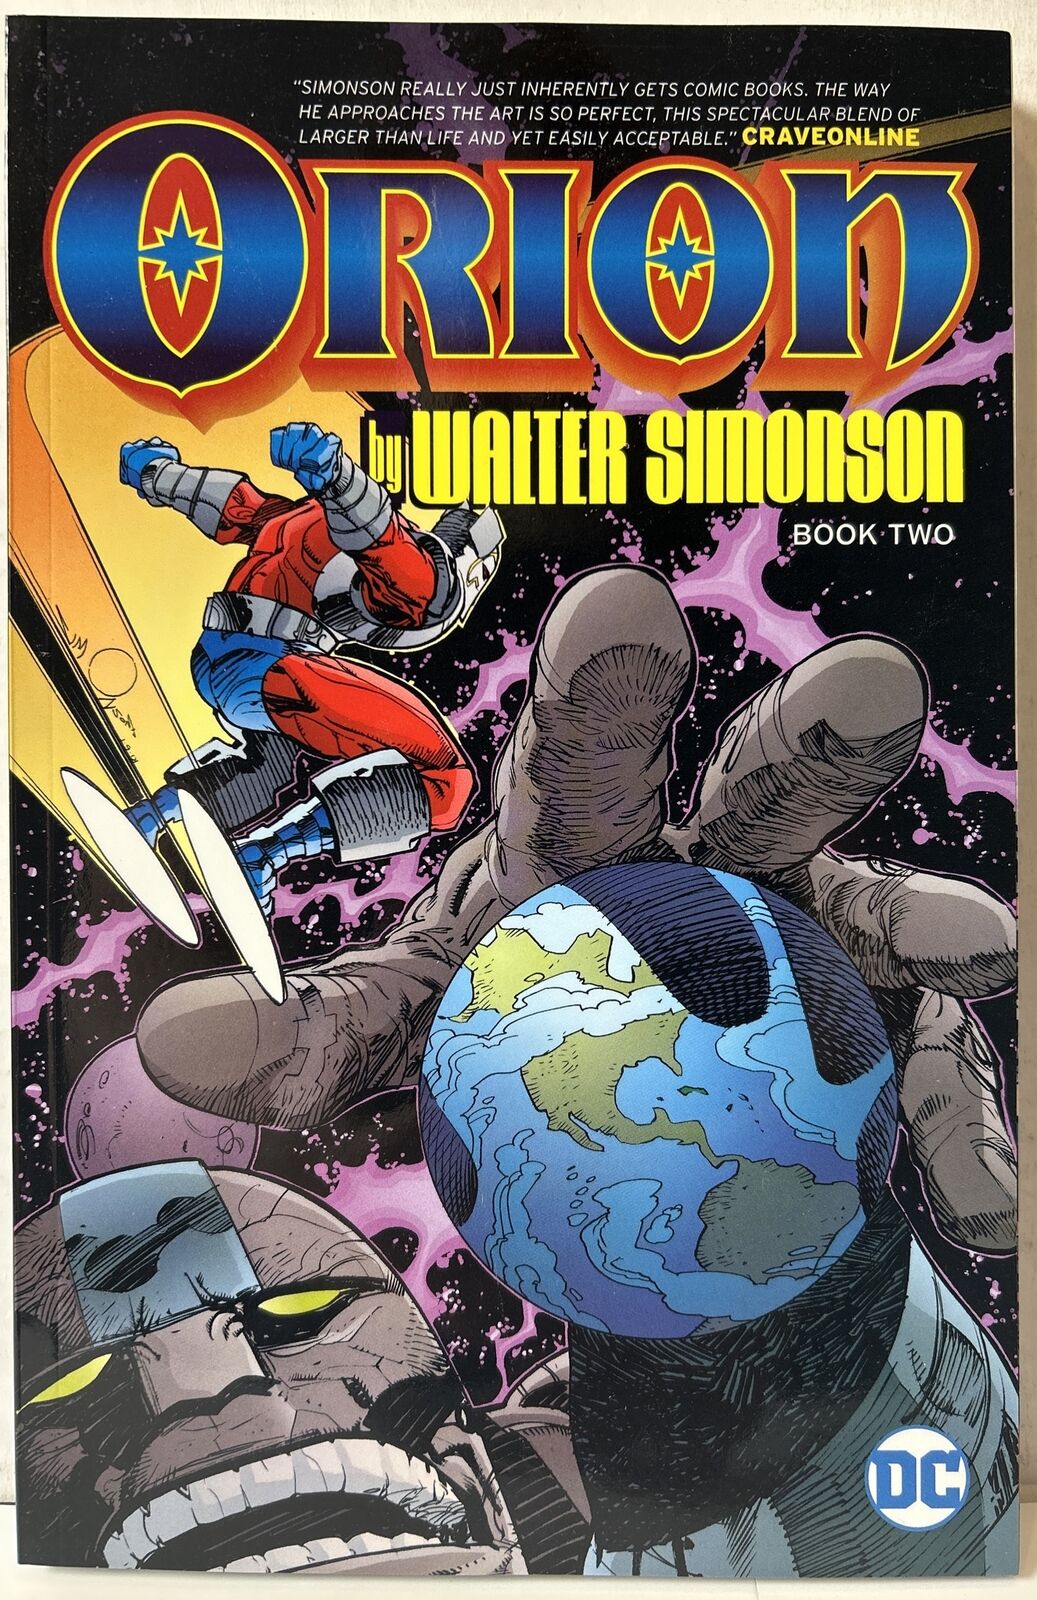 Orion by Walter Simonson #2 (DC Comics October 2019) New Trade Paper